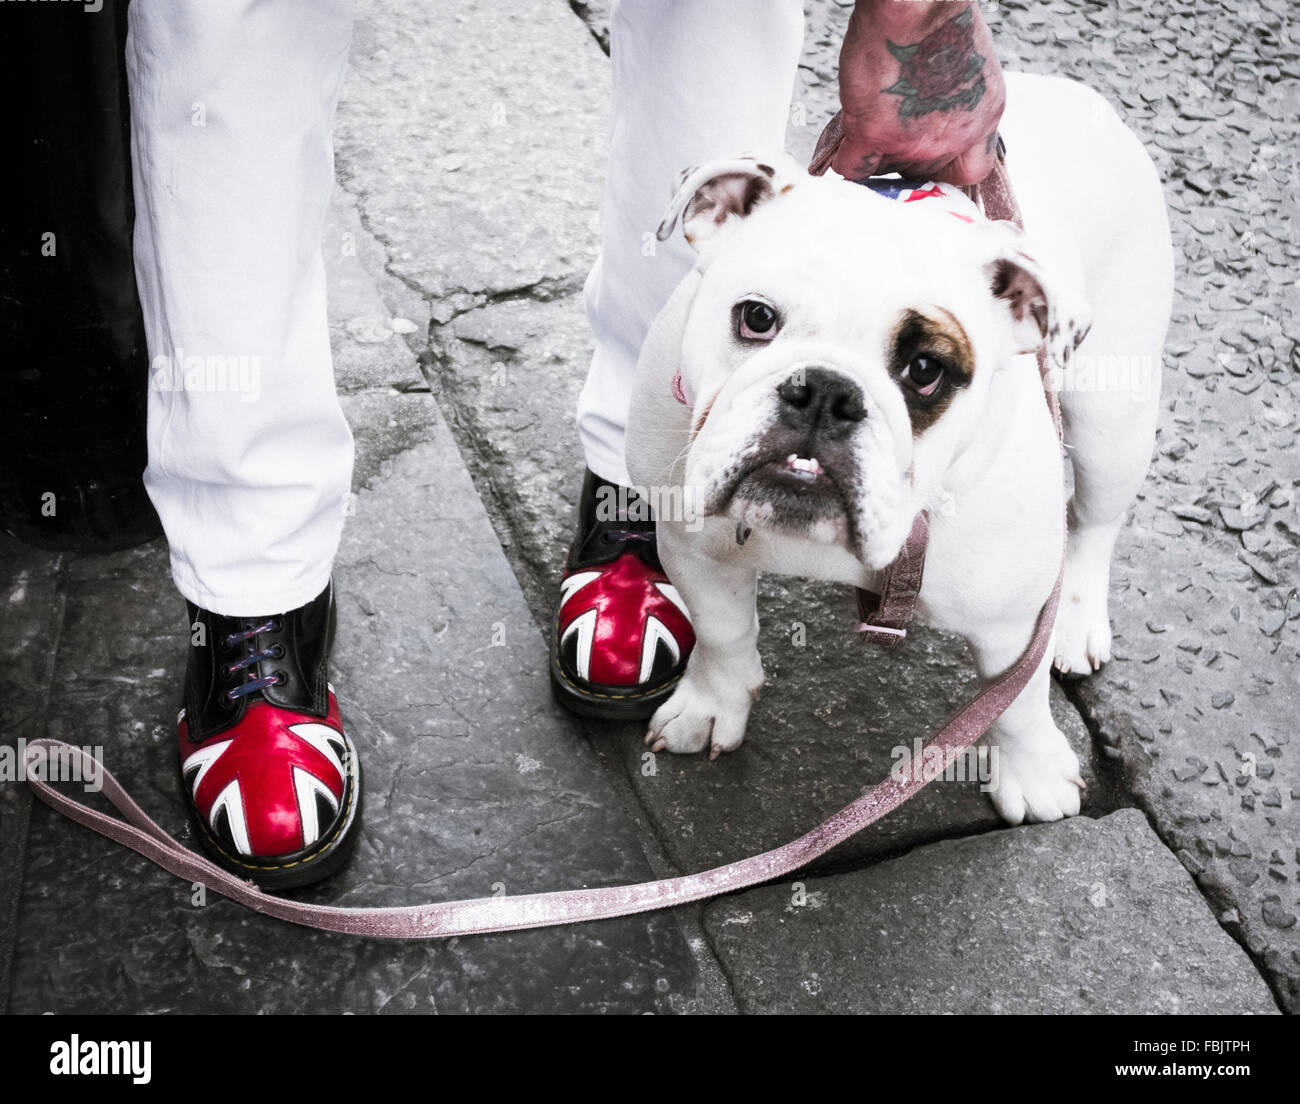 Skinhead with Union Jack on Dr Martens boots in street with British Bulldog  UK Stock Photo - Alamy